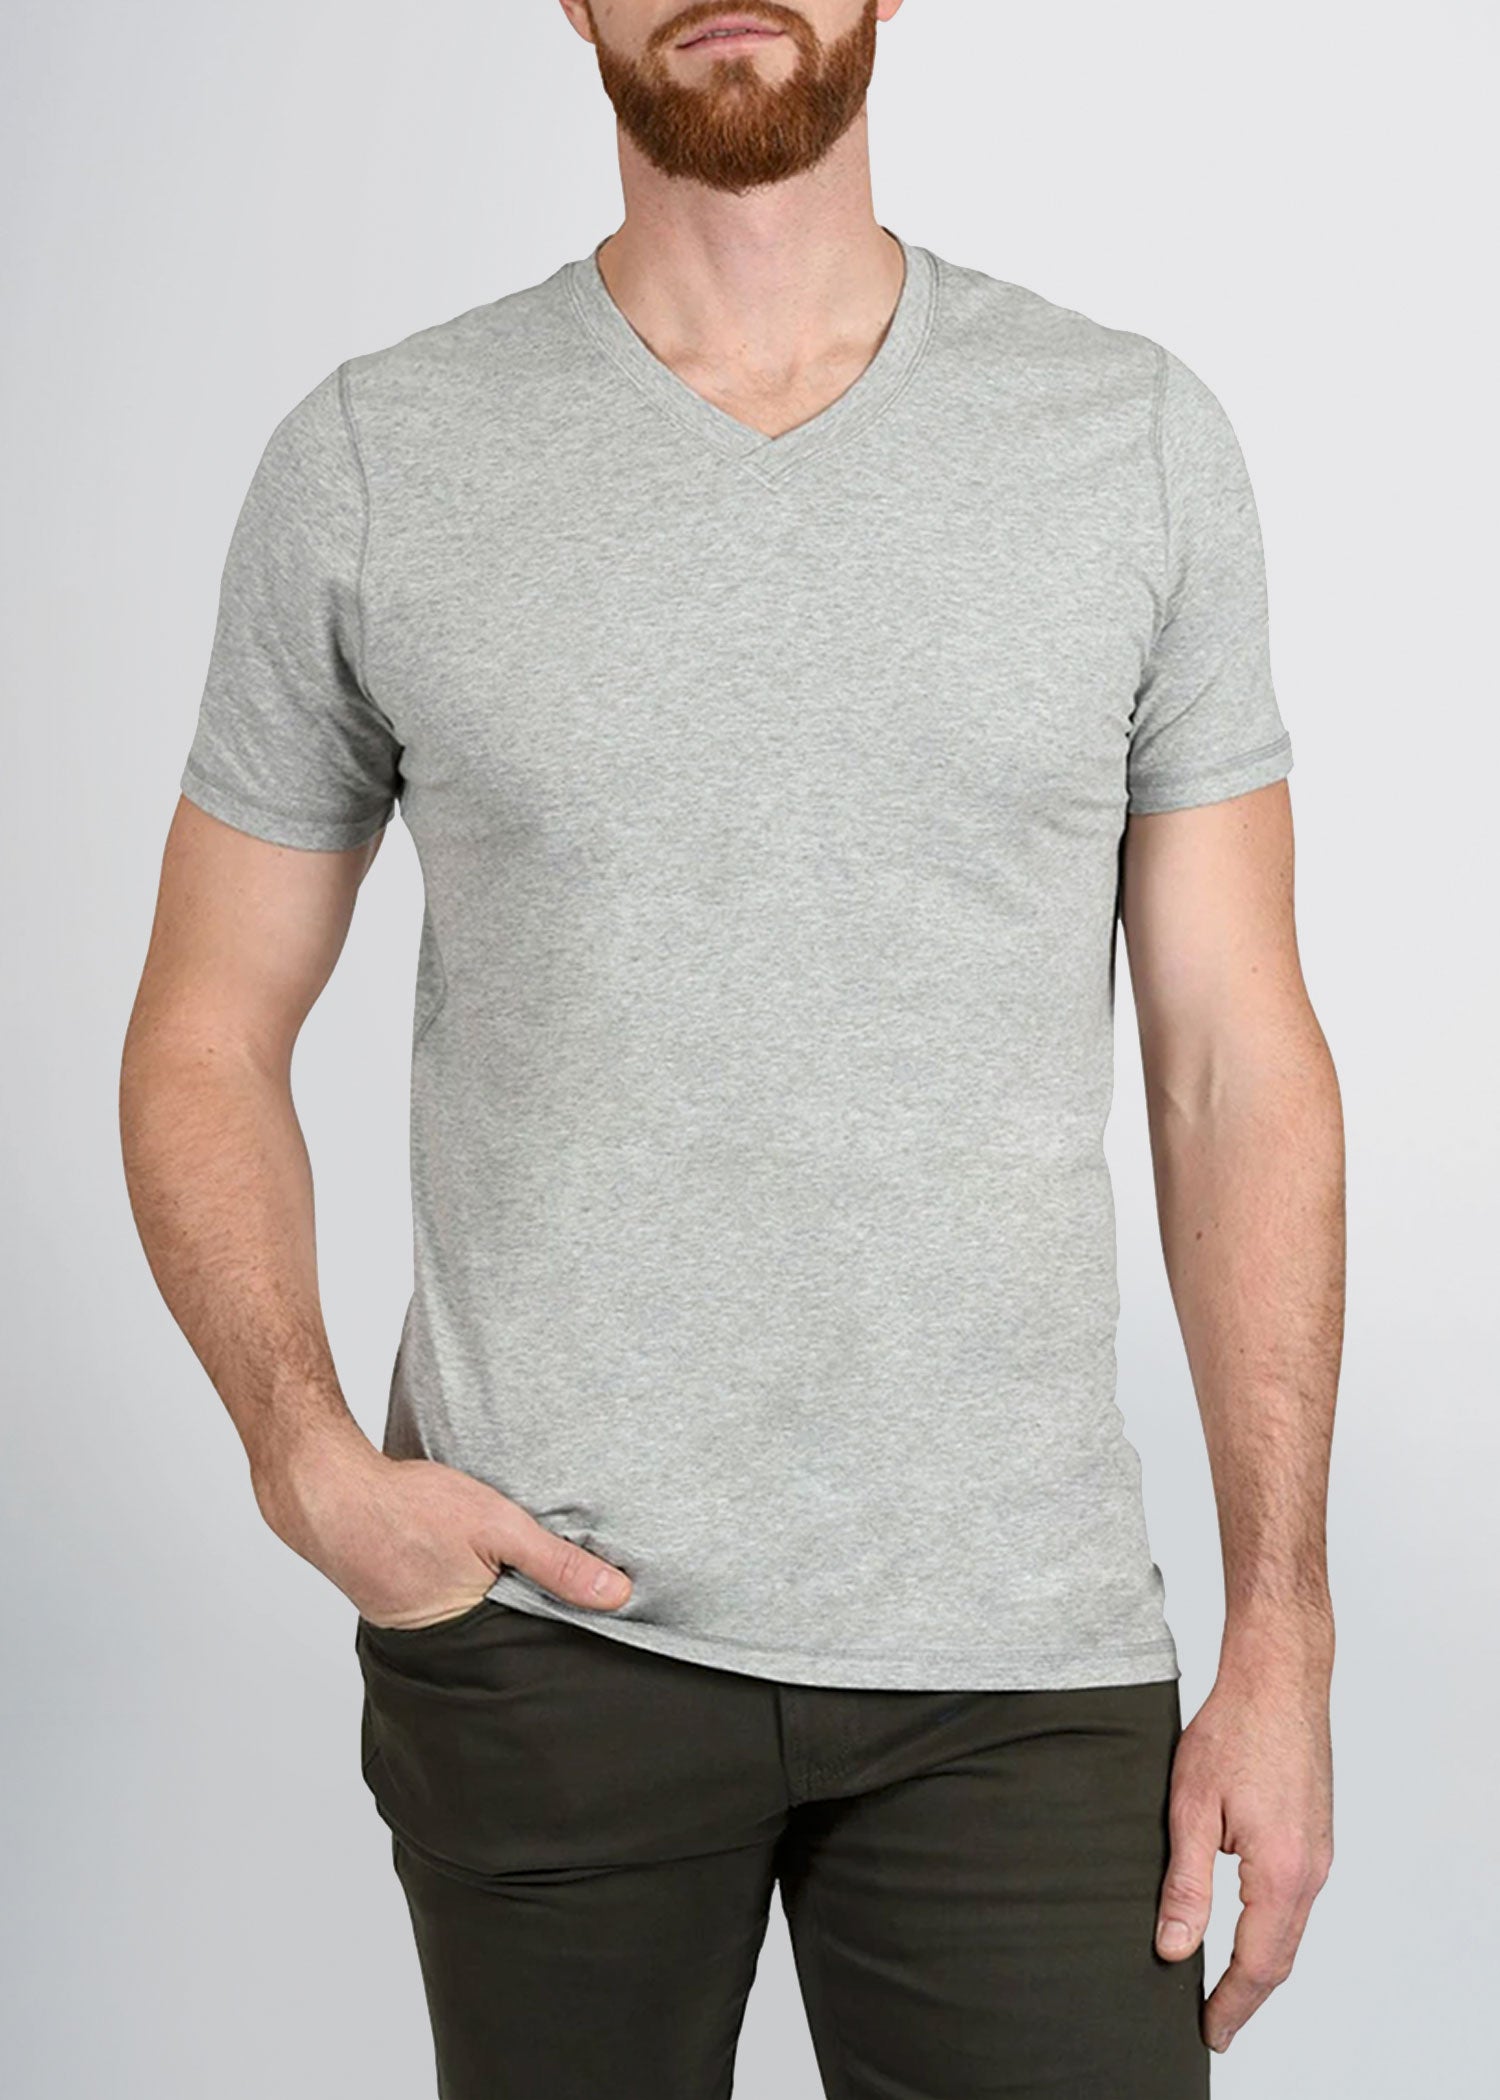 Slim Fit Men's V Neck T Shirts in Grey American Tall